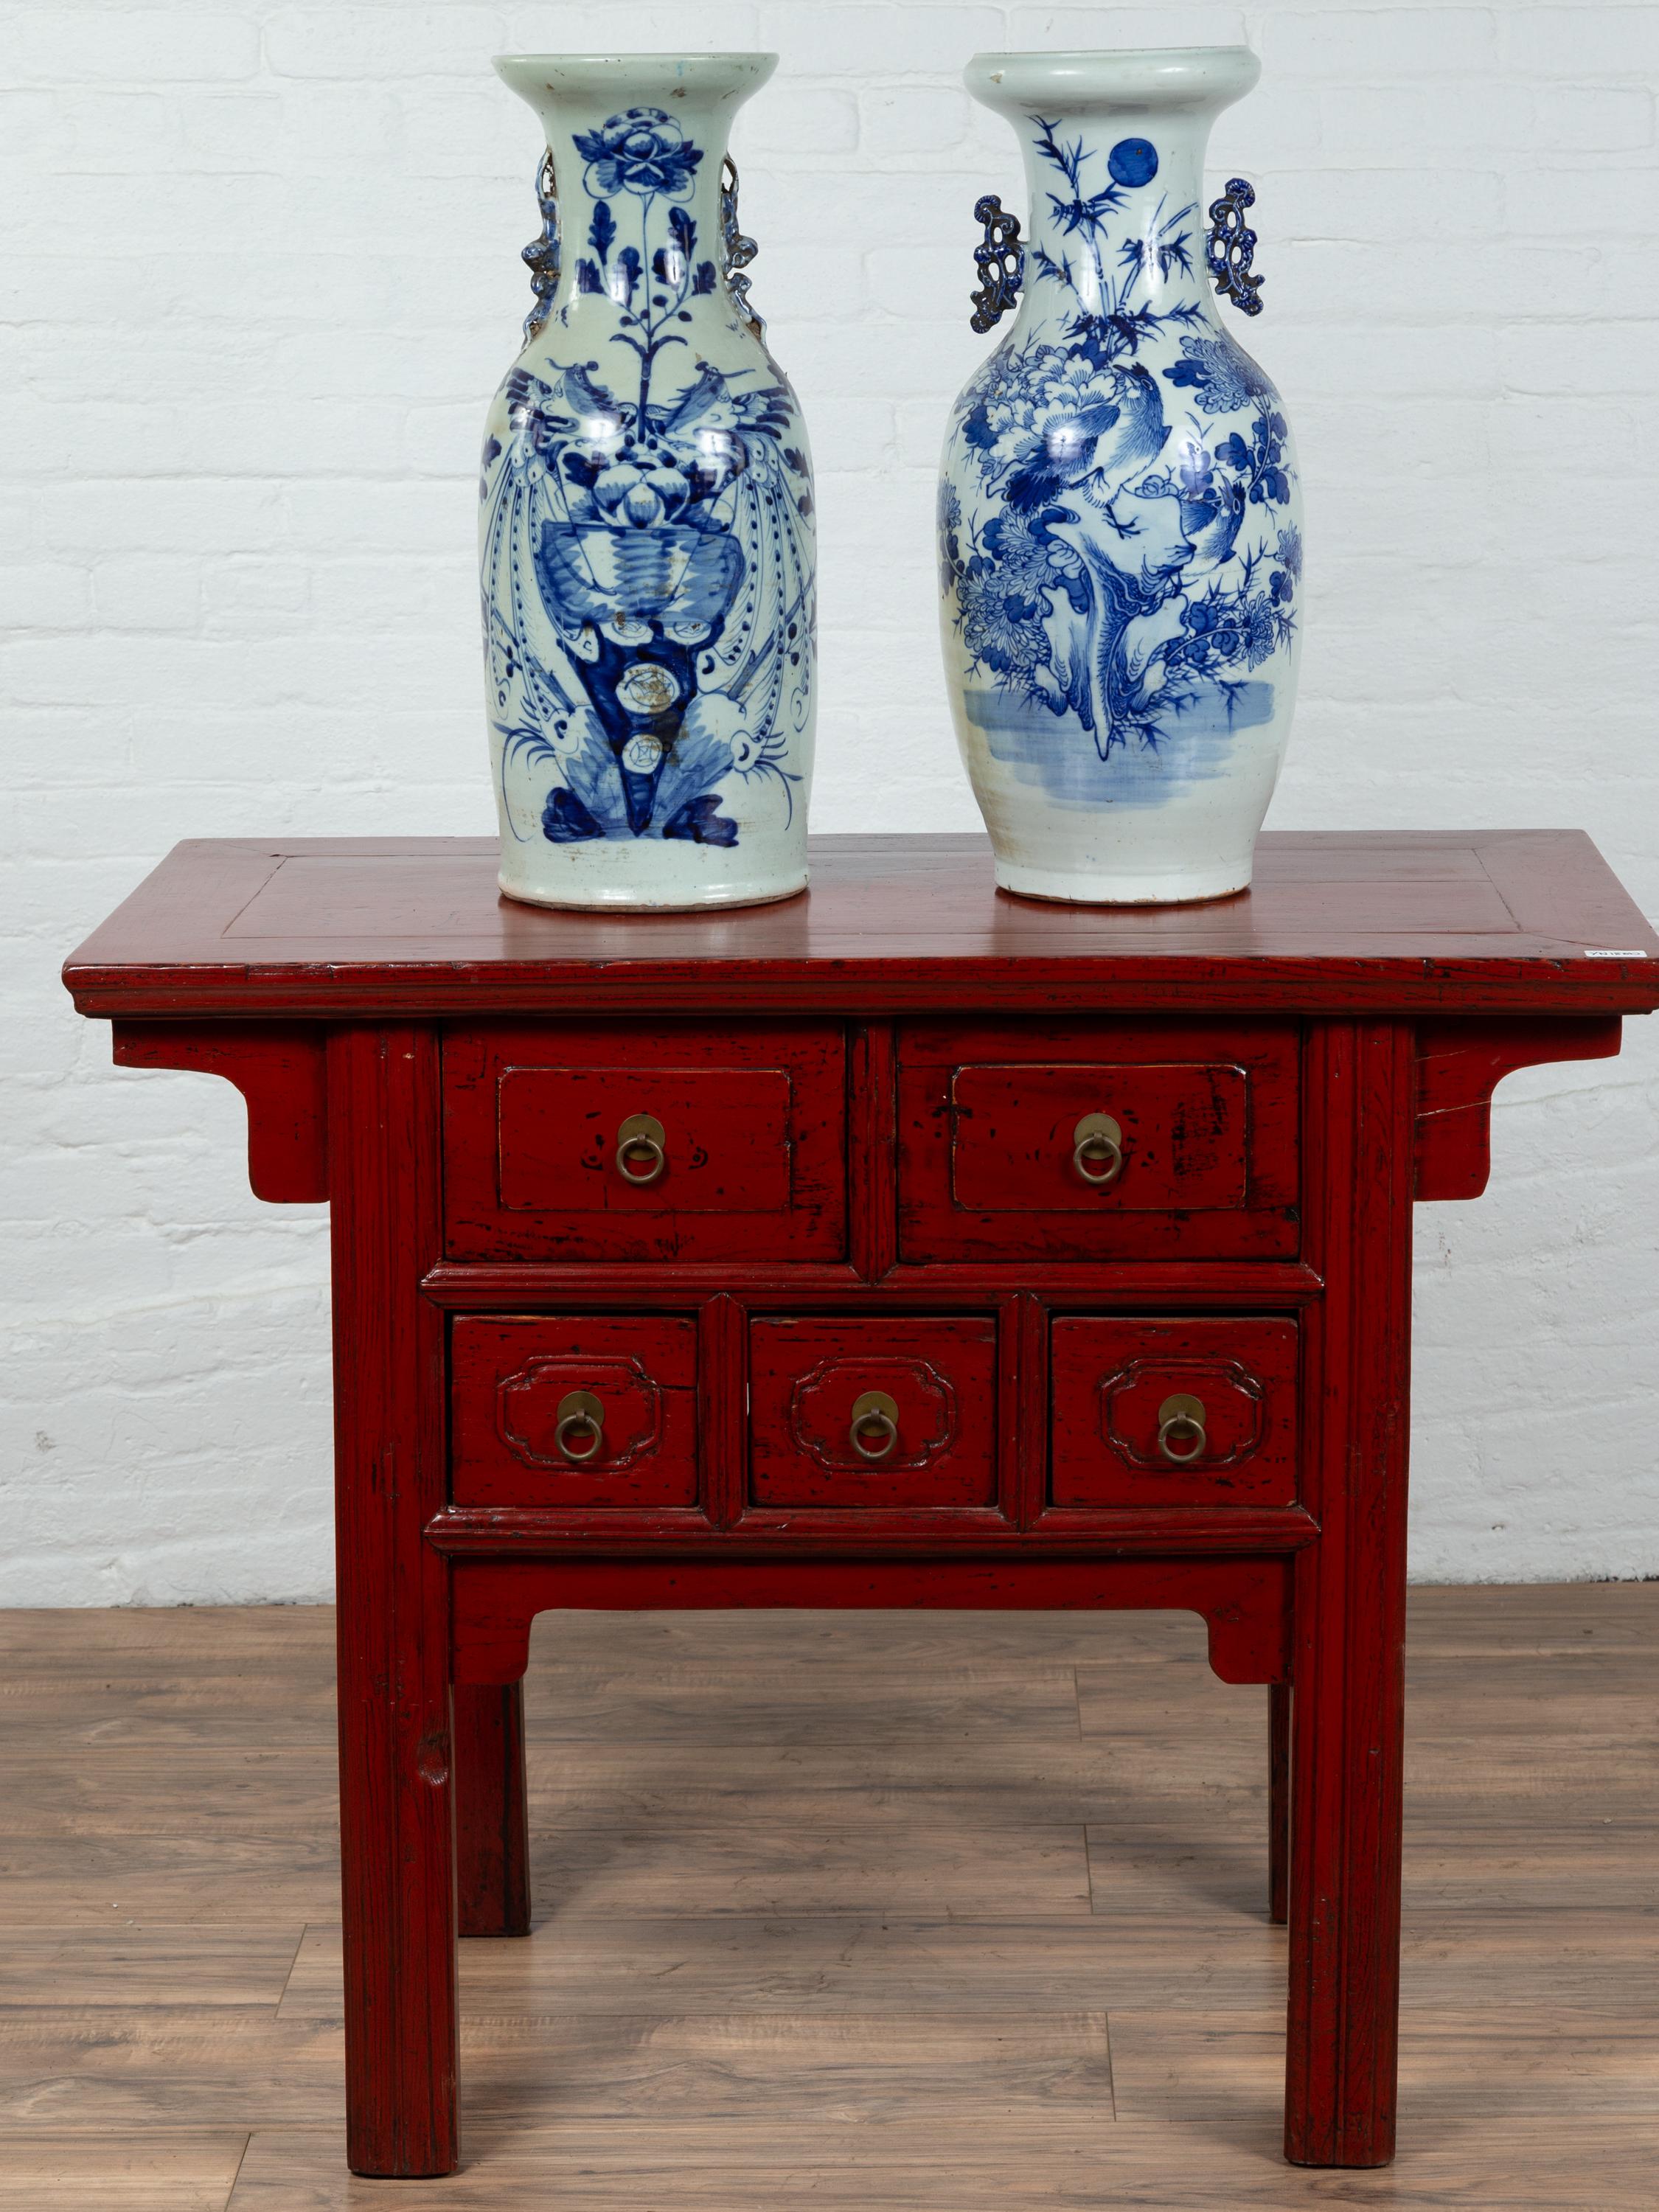 A near pair of antique Chinese porcelain altar vases with hand painted blue motifs. Capturing our attention with their elegant lines and hand painted décor, this near pair of altar vases will make for a great decorative accentuation in any home.